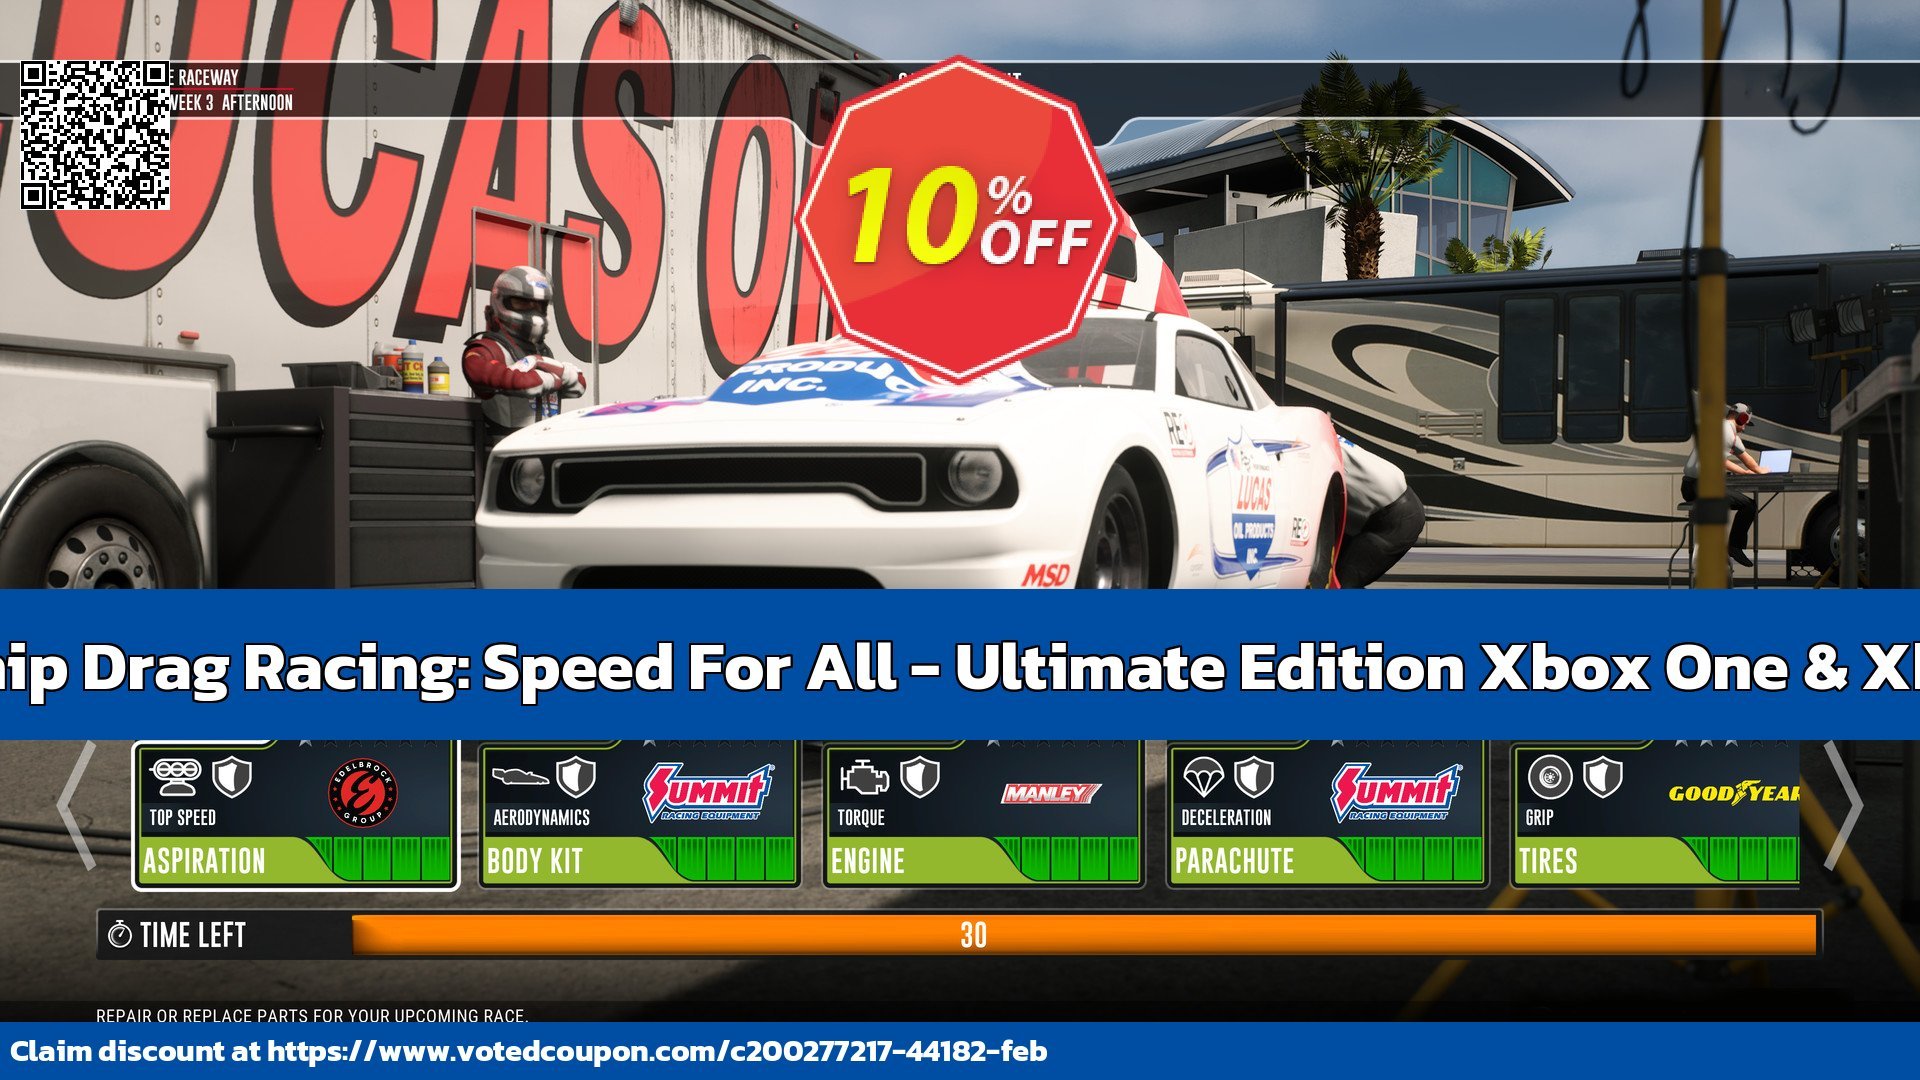 NHRA Championship Drag Racing: Speed For All - Ultimate Edition Xbox One & Xbox Series X|S, US  Coupon Code May 2024, 10% OFF - VotedCoupon